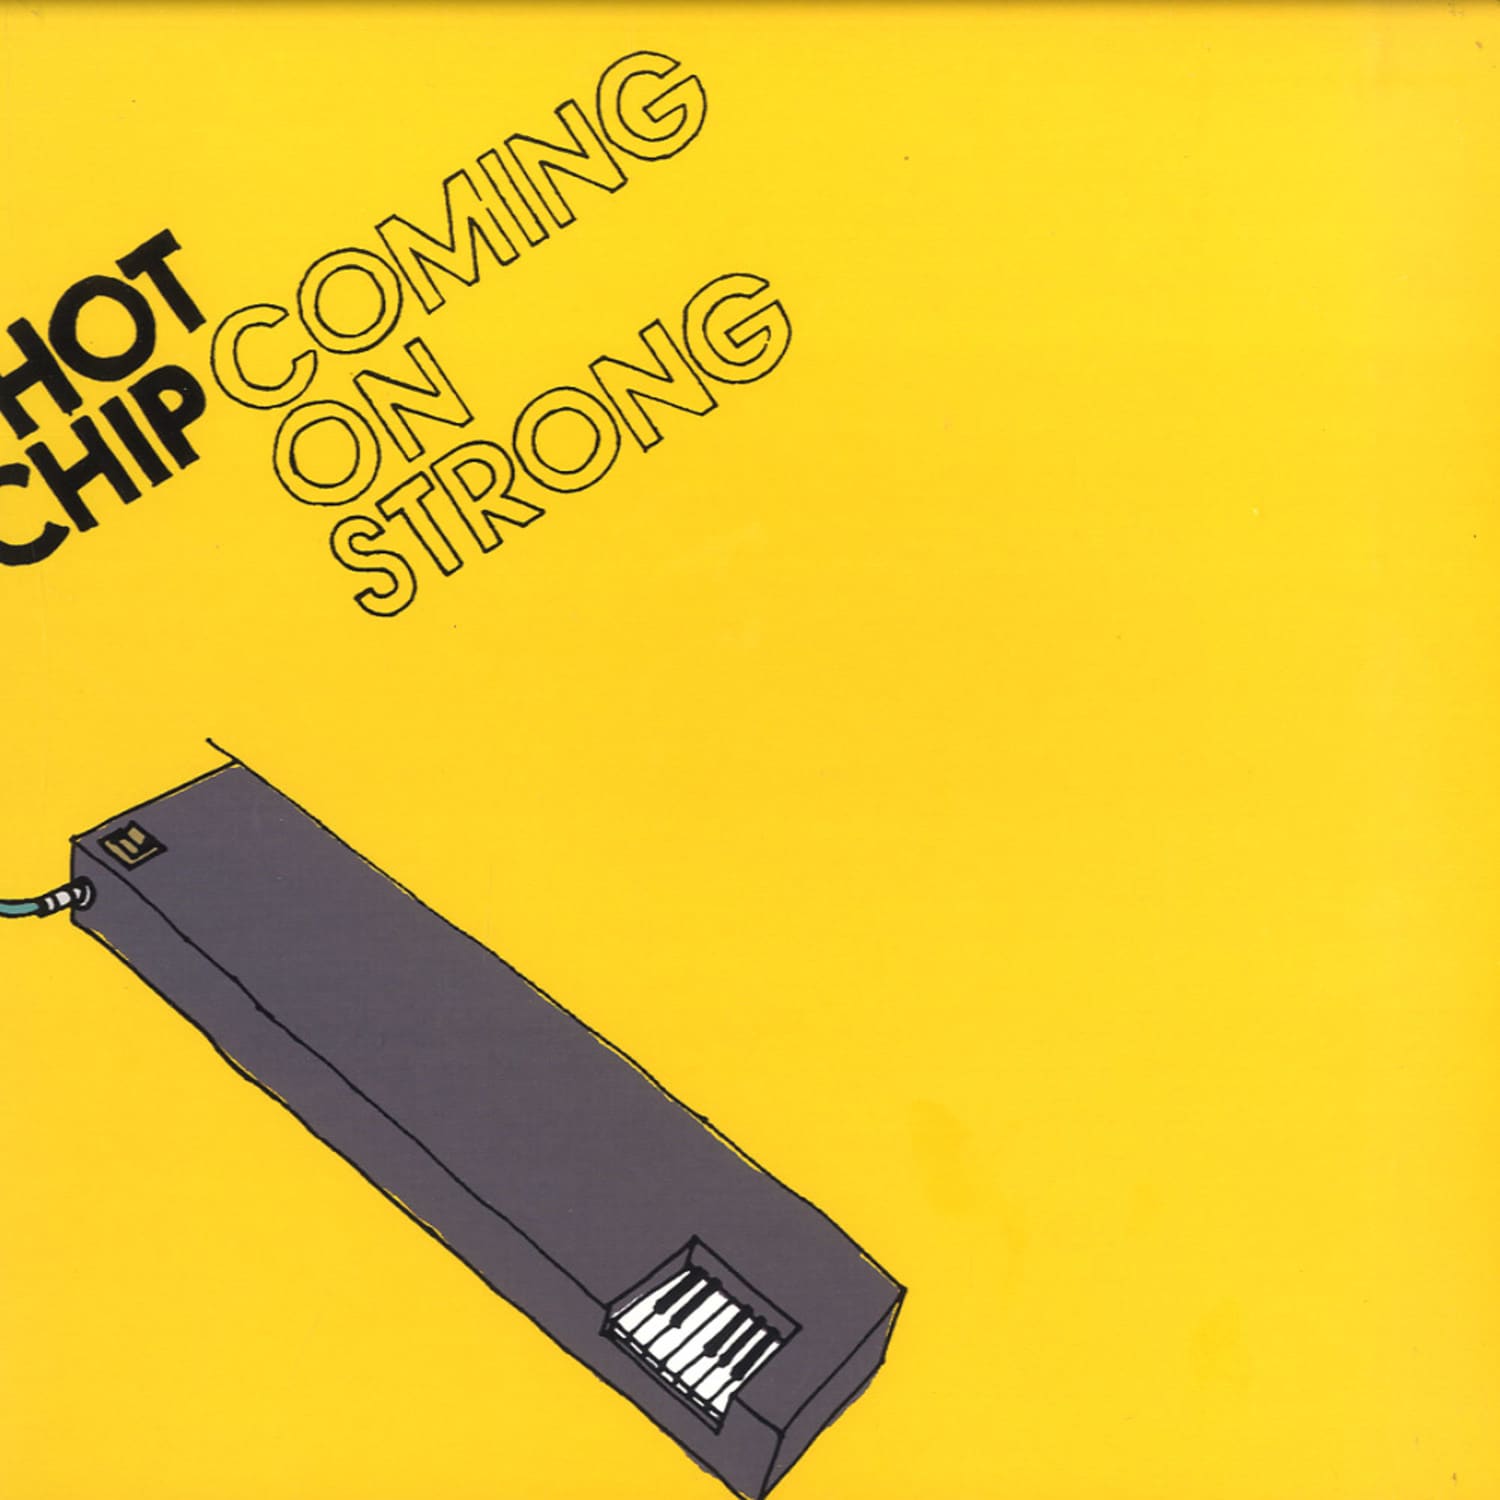 Hot Chip - COMING ON STRONG 